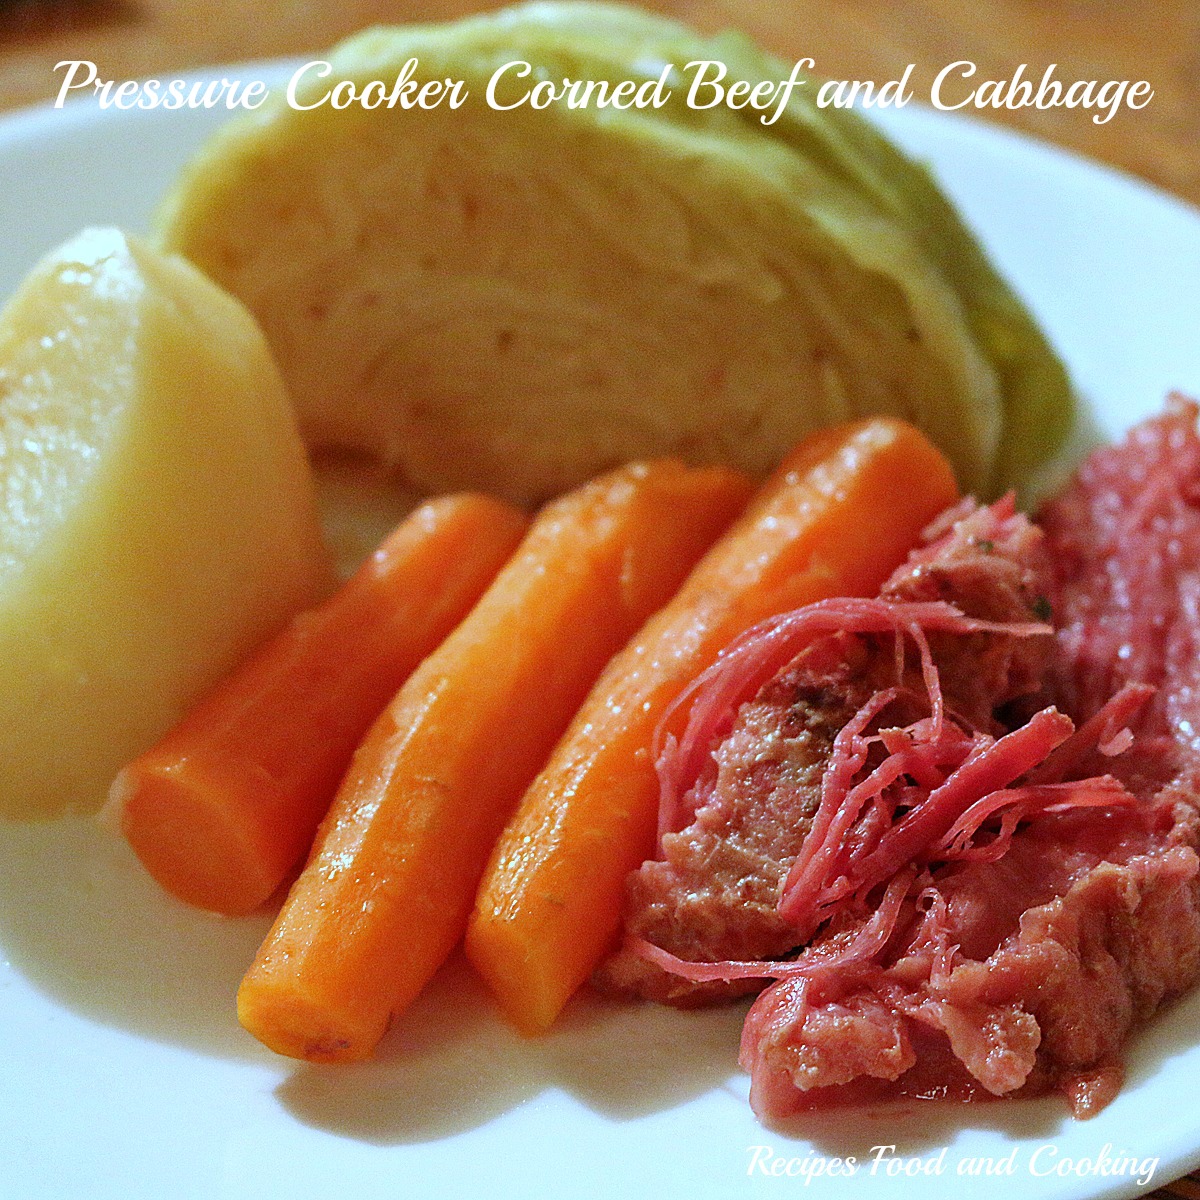 Pressure Cooker Corned Beef with Cabbage, Carrots and Potatoes